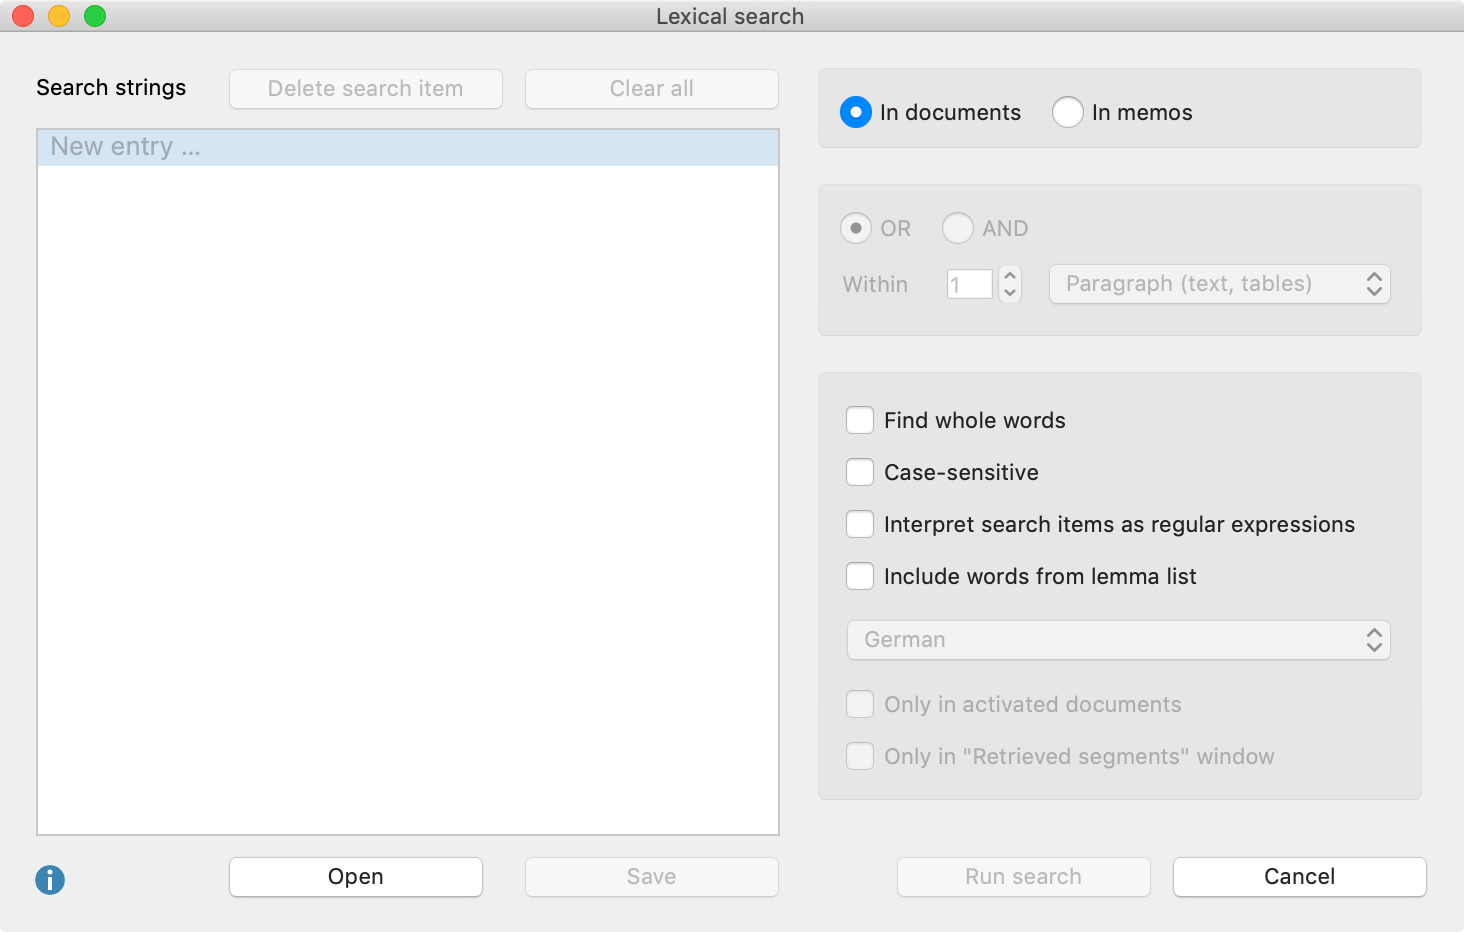 The dialog window for the lexical search